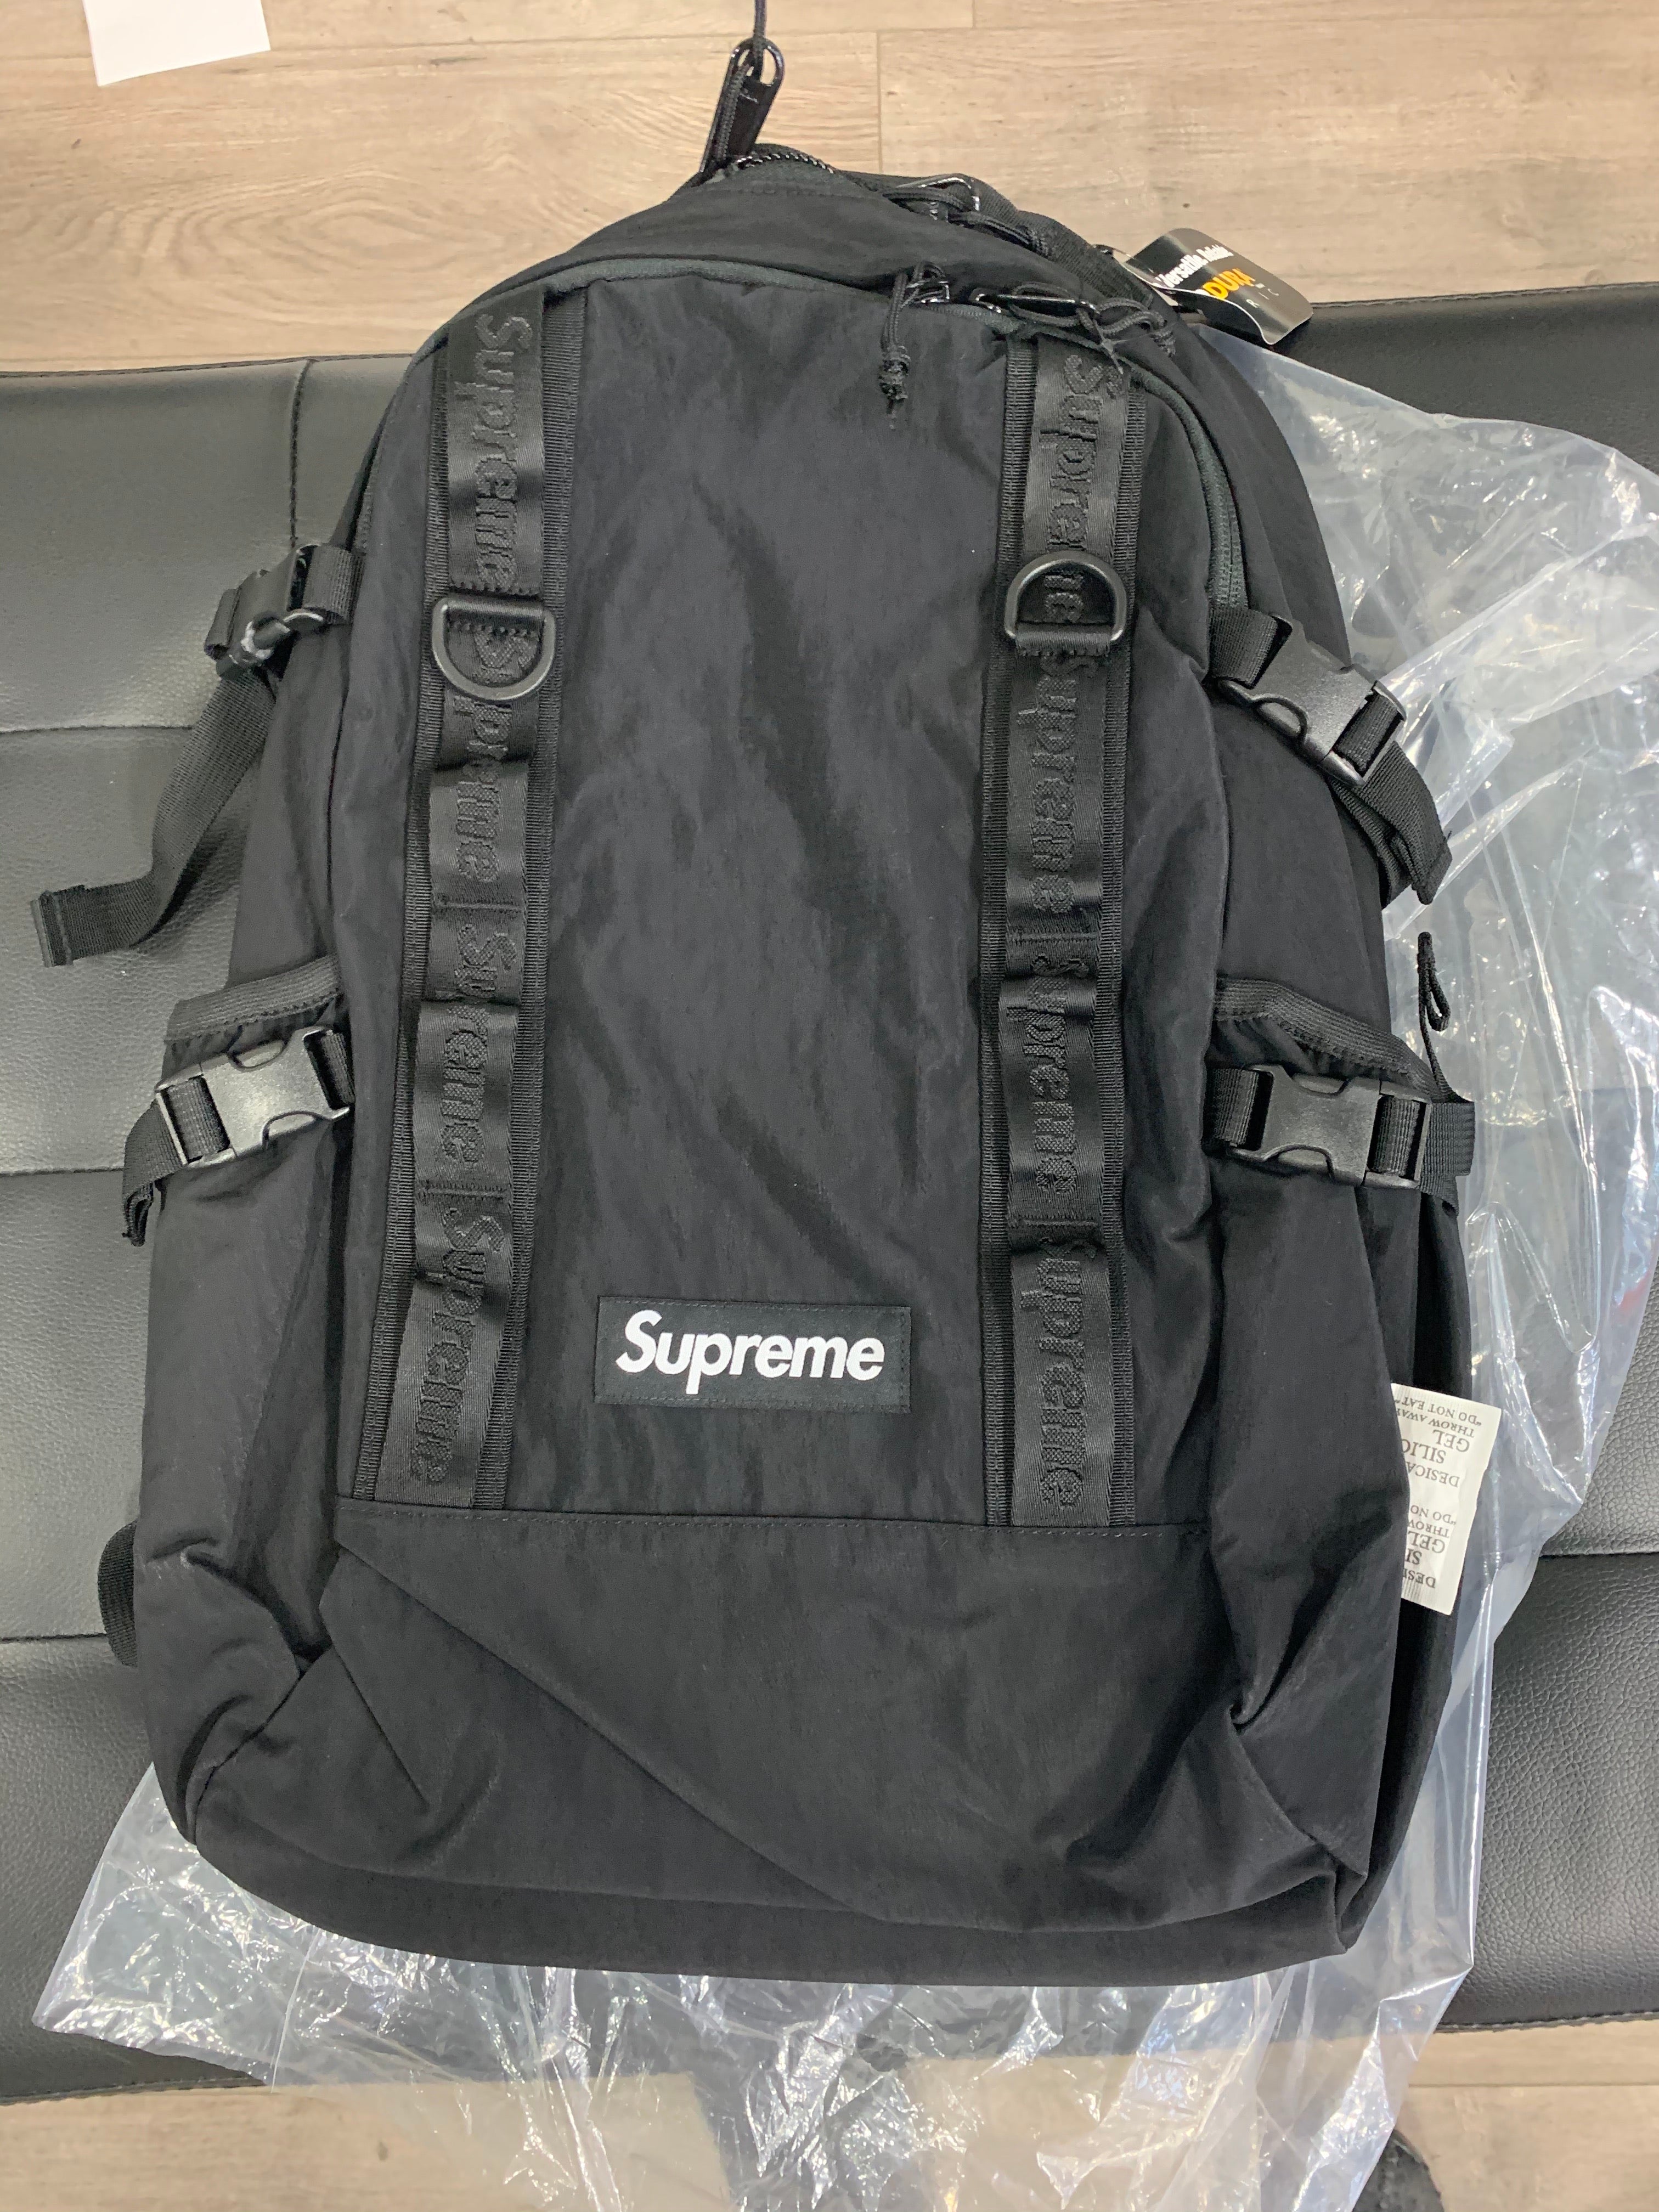 THE FOURHEADS on Instagram: Supreme Backpack FW20 Water resistant